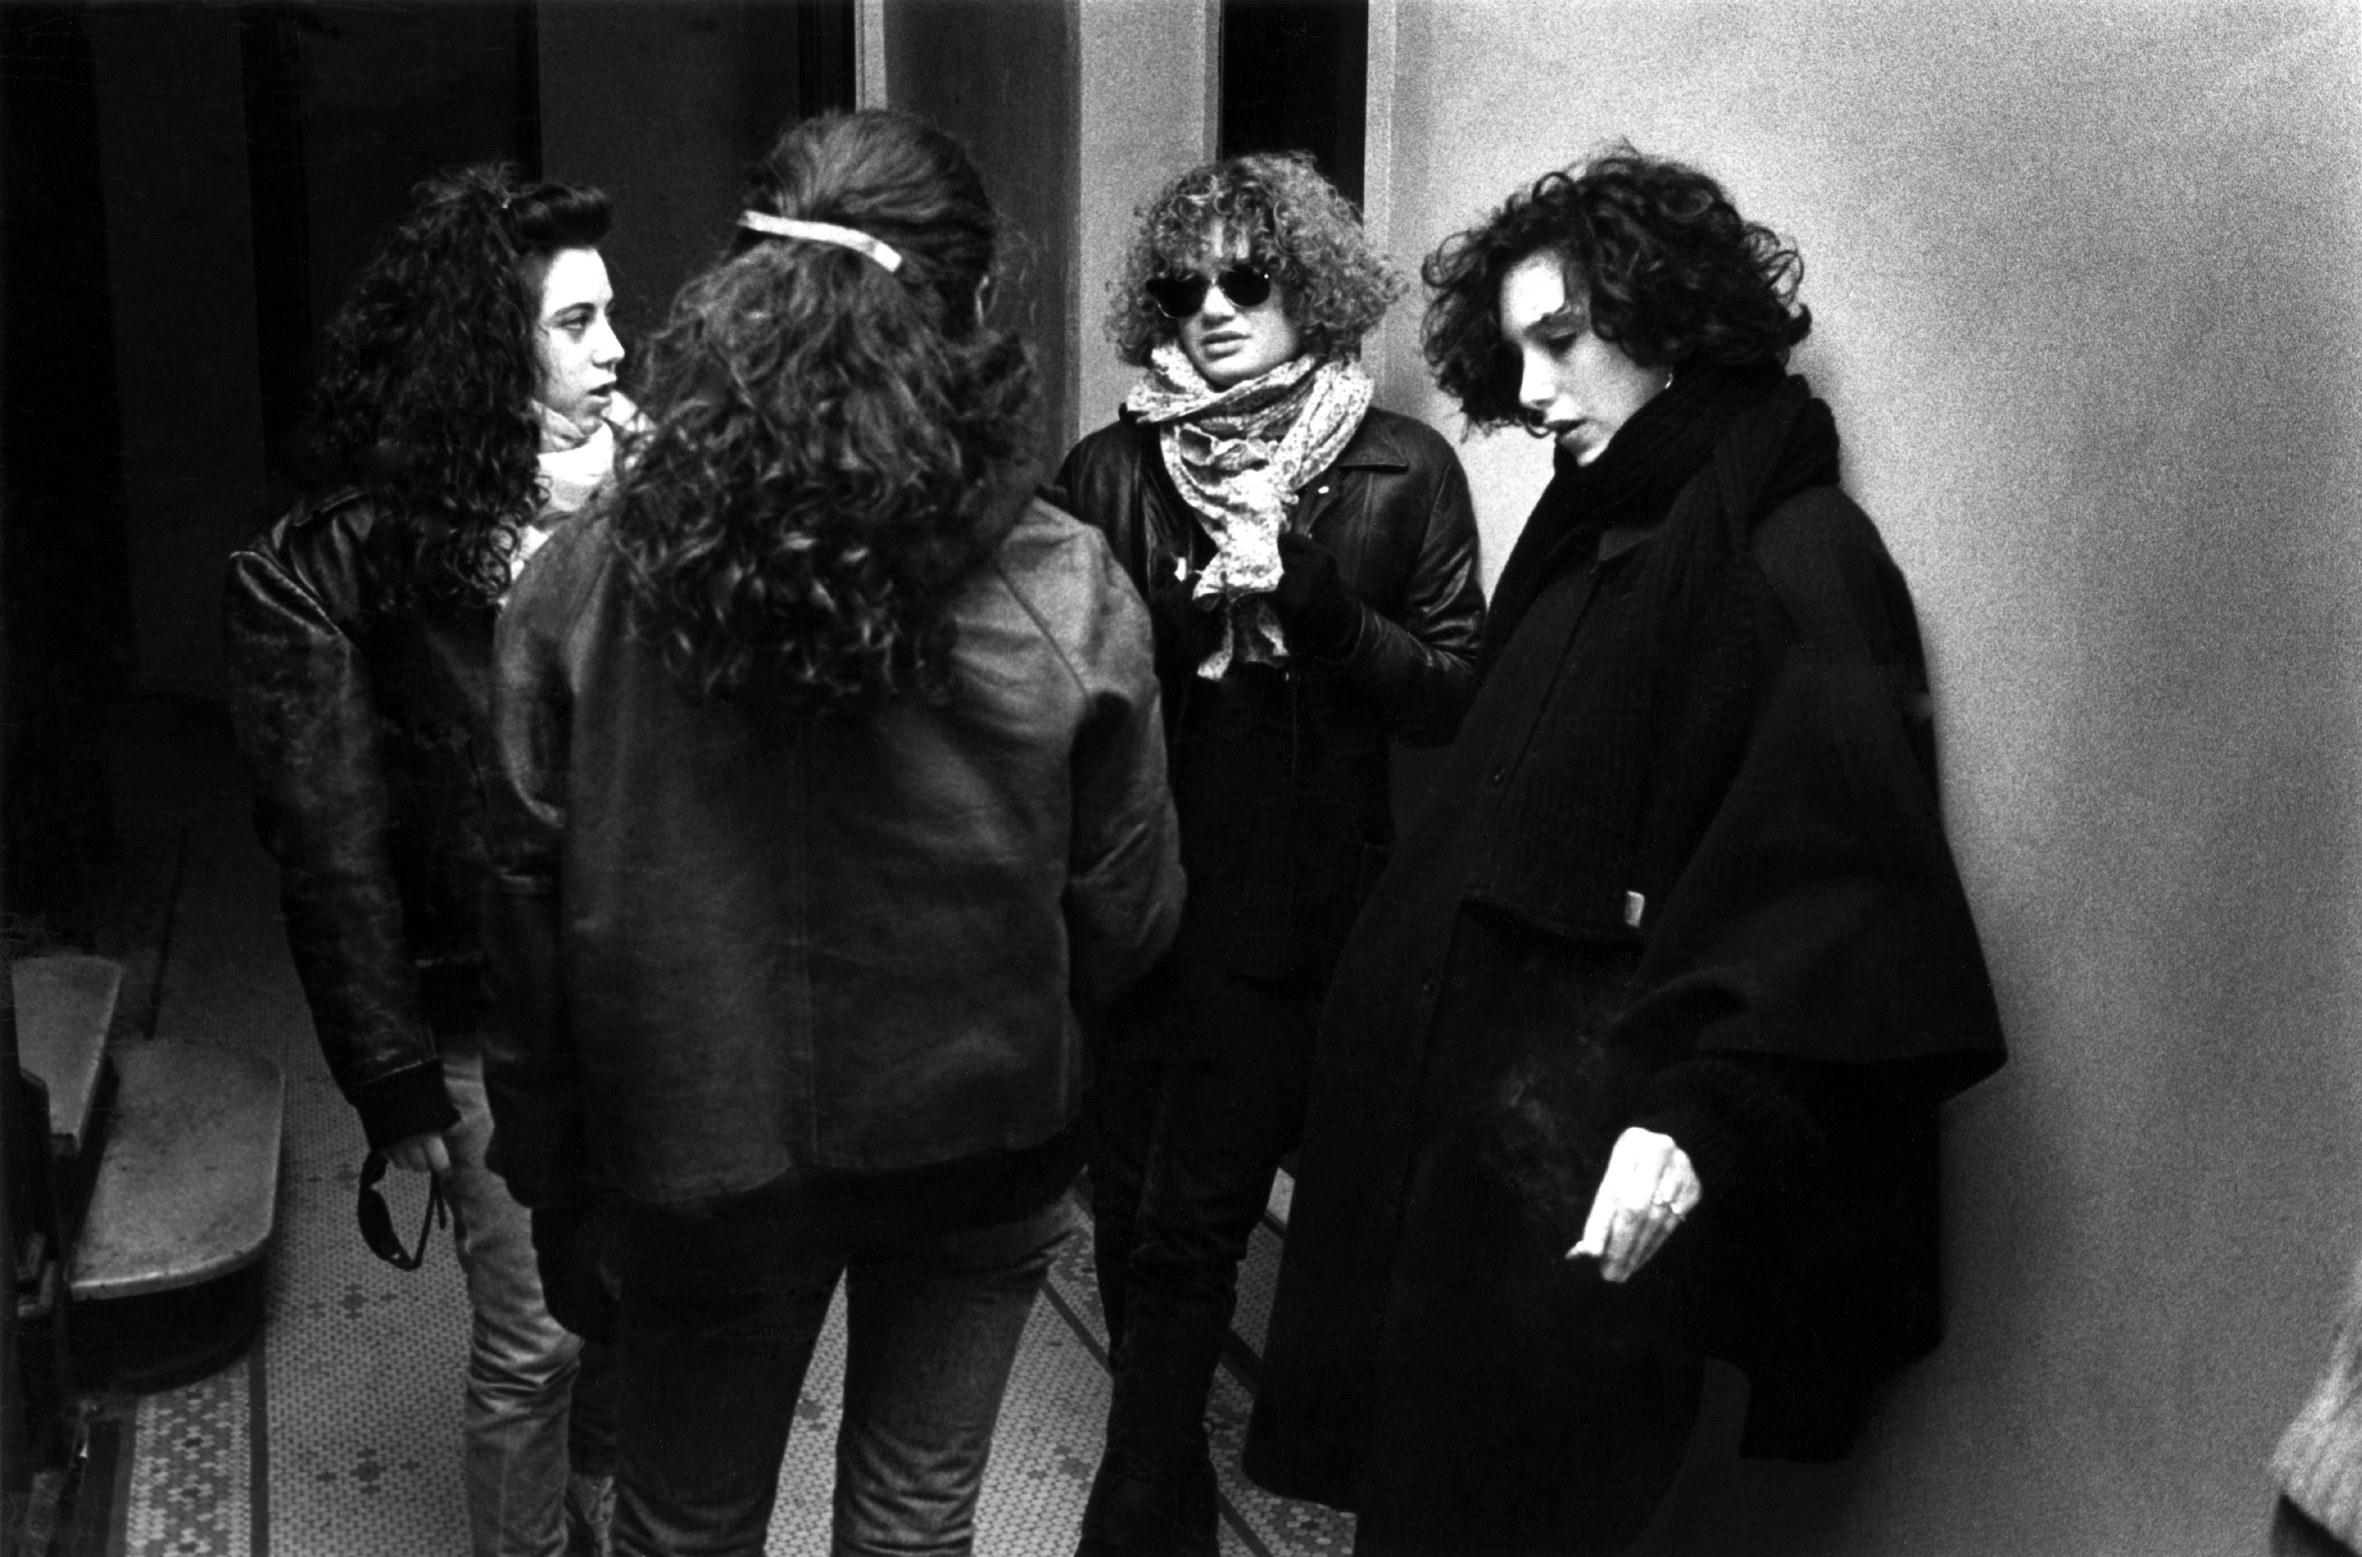 Four curly haired girls in coats in a stairwell in a new york city building